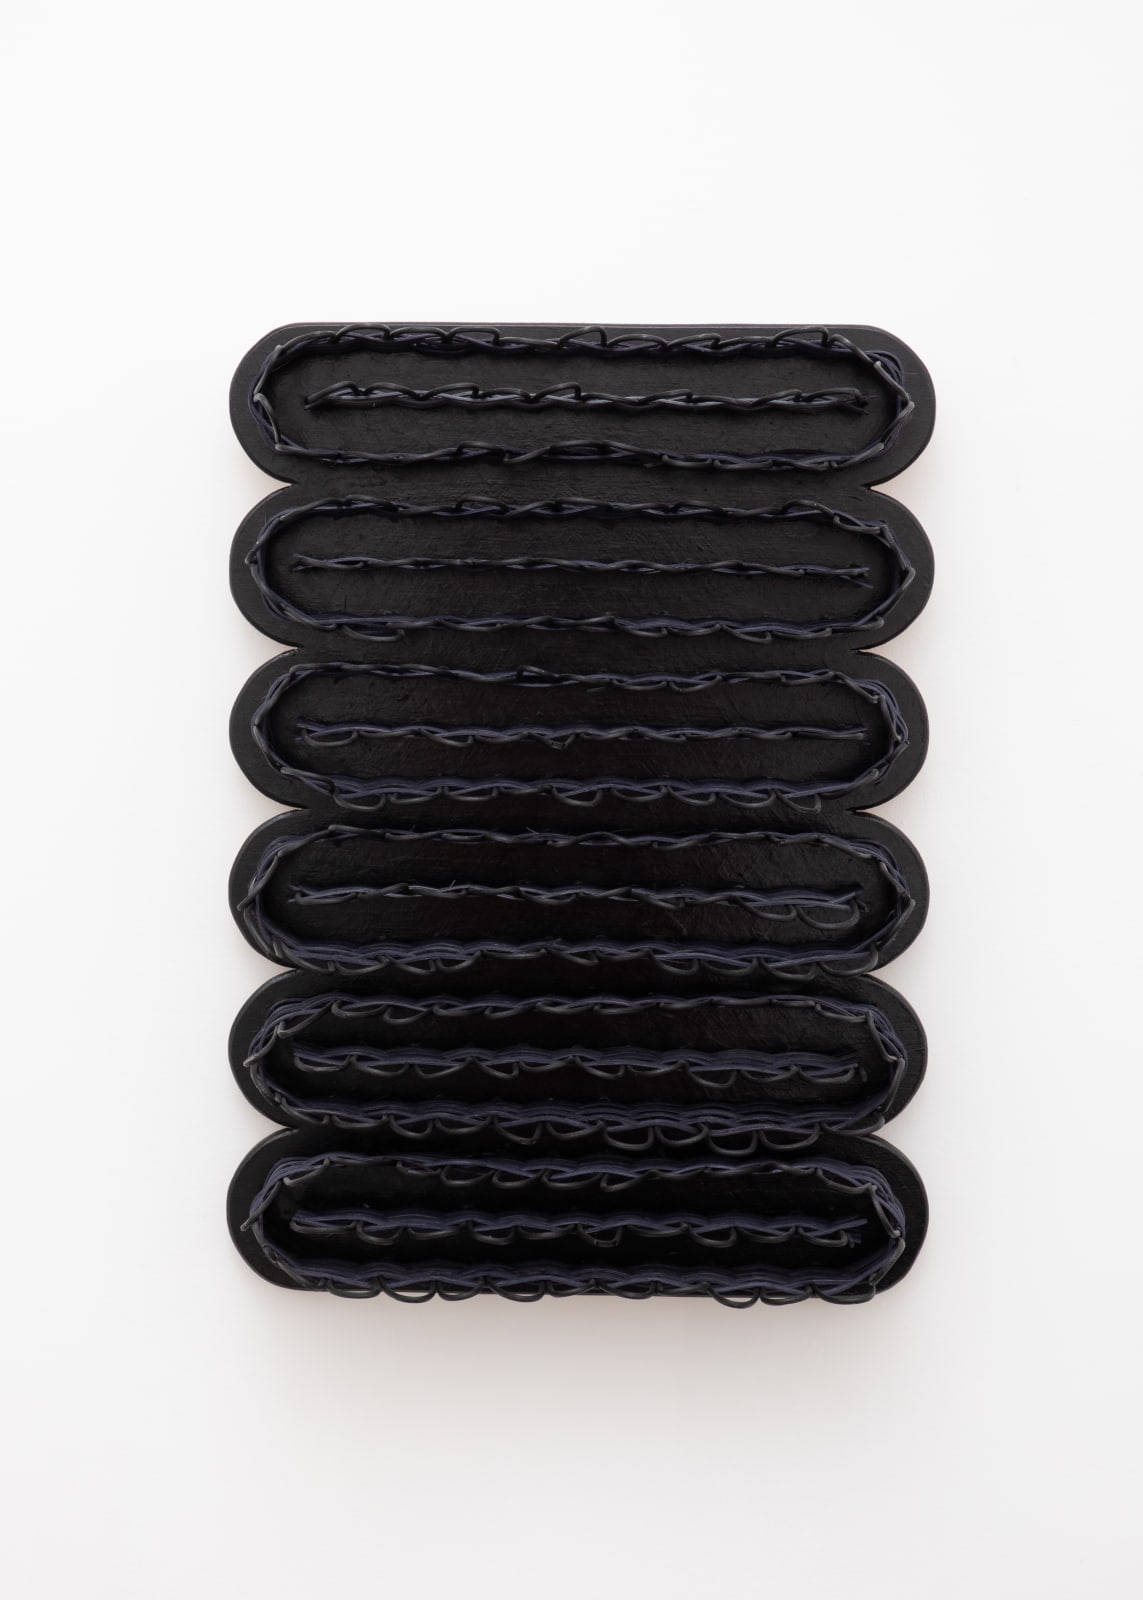 Wall-mounted sculpture consisting of a black wooden rectangular base with scalloped edges, with woven black reeds attached in a meandering pattern from end to end.